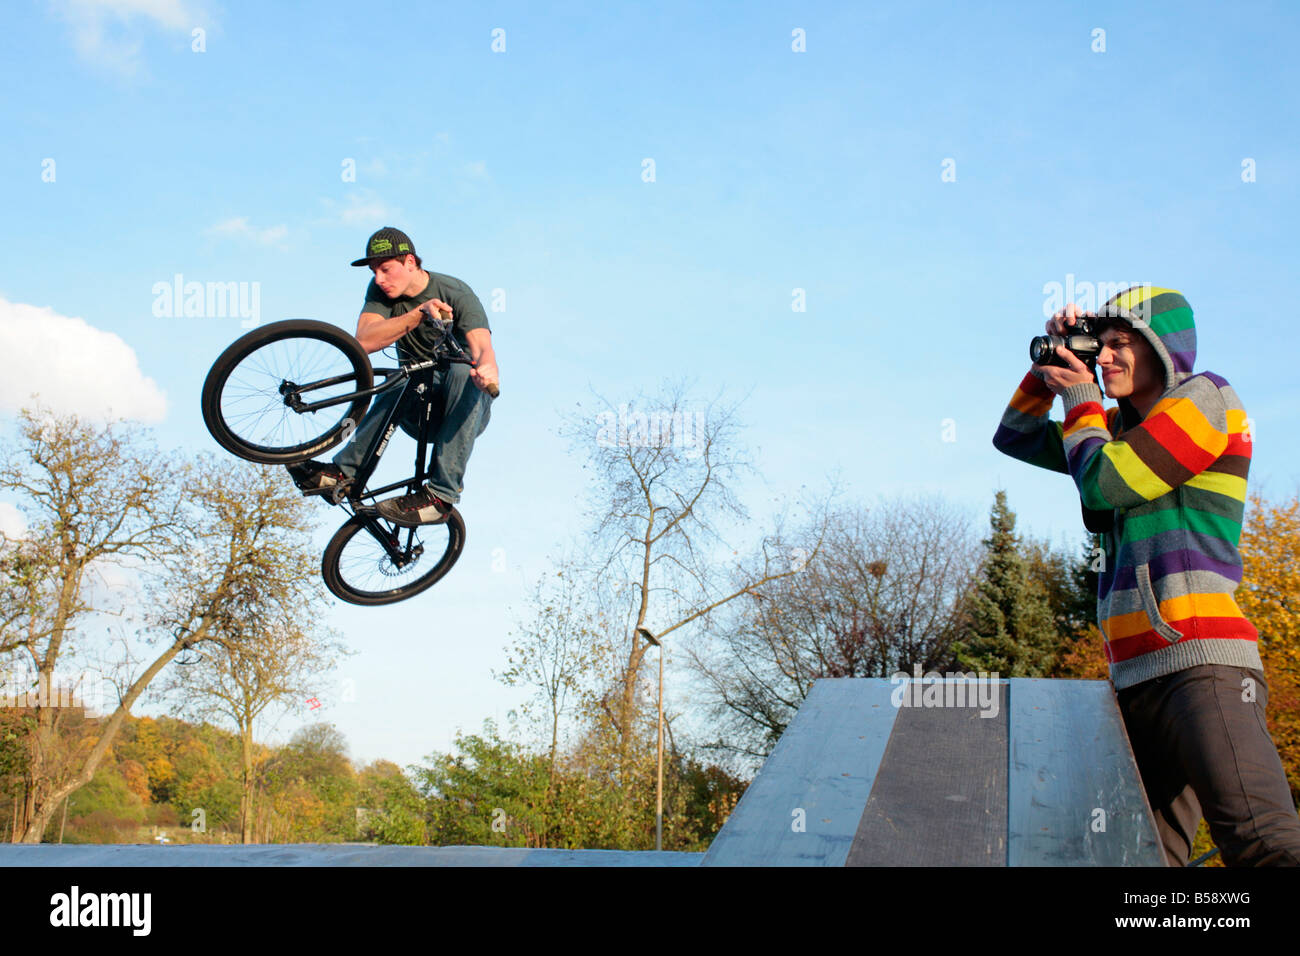 young man jumping with his bicycle while another one is taking photographs Stock Photo